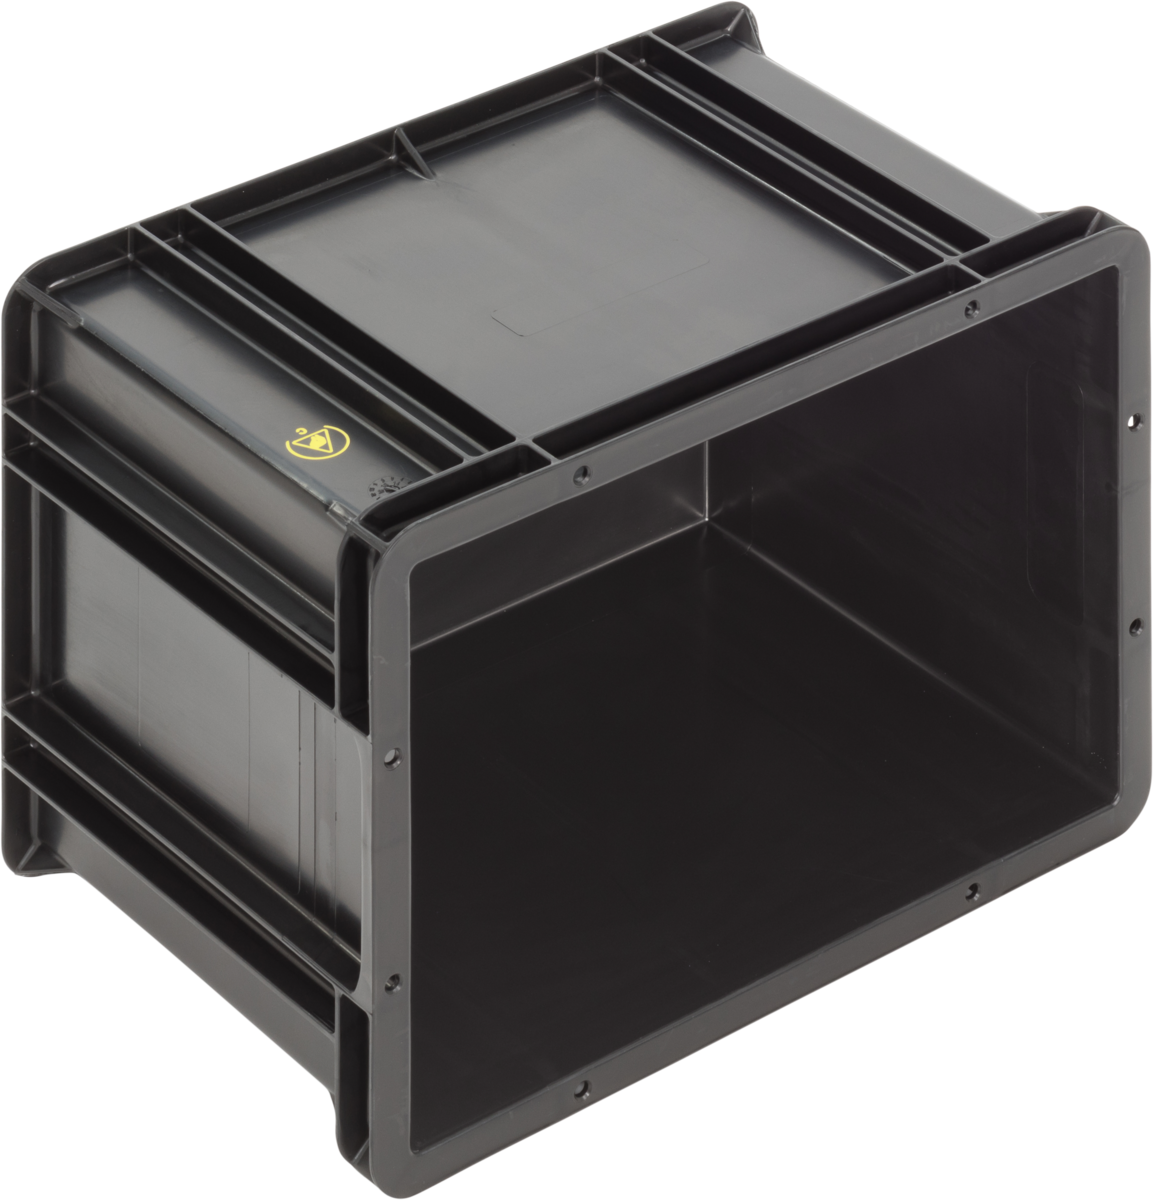 ESD-Safe-SGL-Norm-Stacking-Bin-Containers-Flat-Base-Ref.-4326.007.992_1004402_400x300x278_03